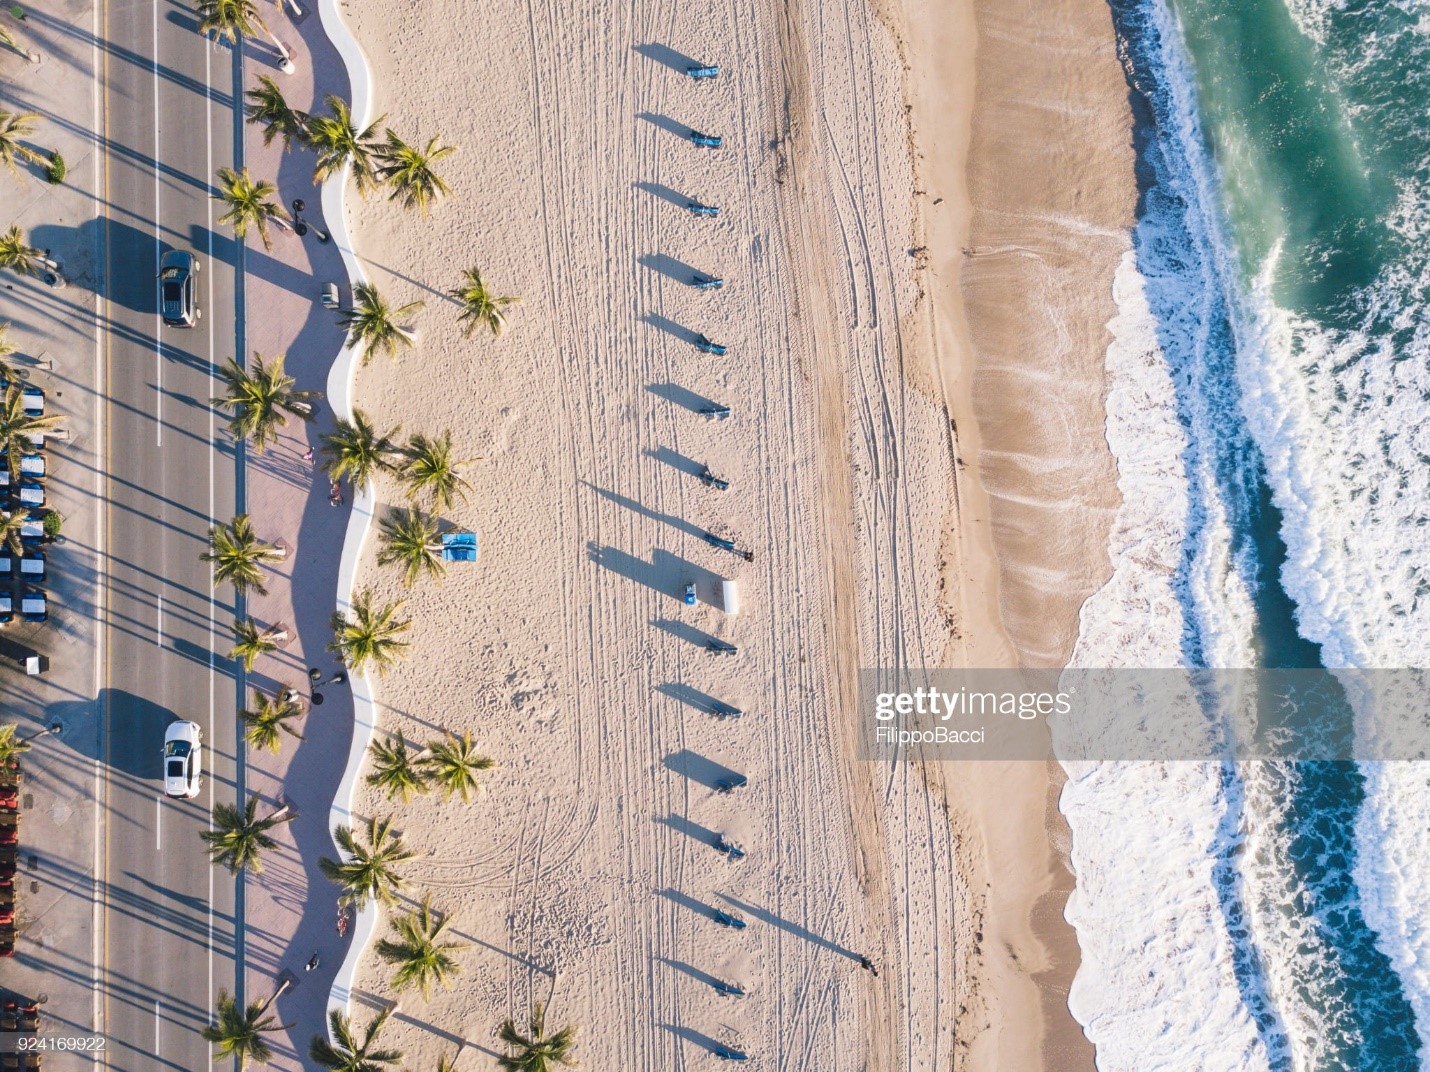 Fort Lauderdale Beach, not far from Miami, at sunrise from drone point of view. 